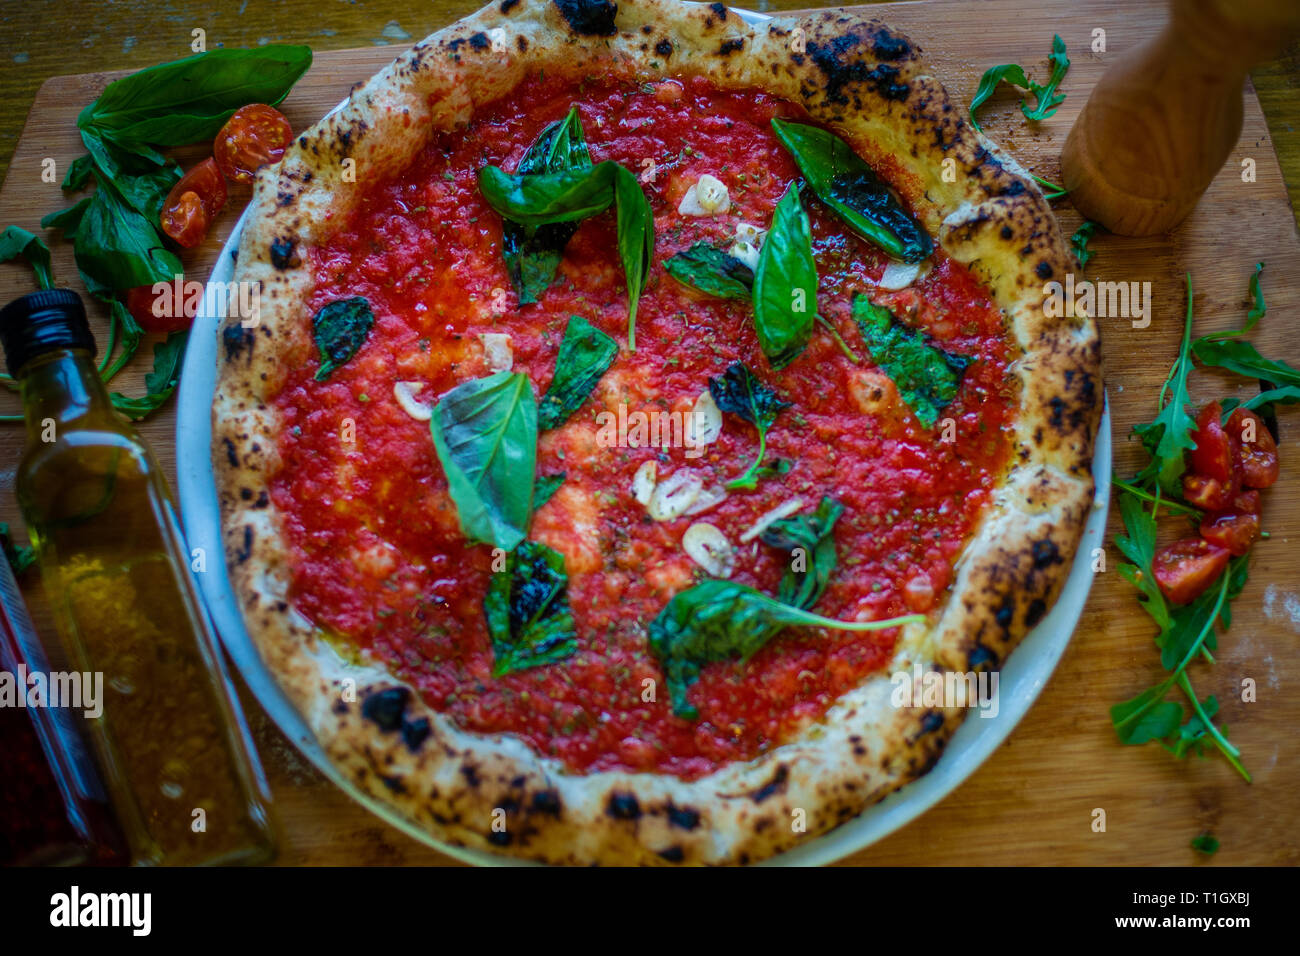 Vegan wood fired pizza. A traditional authentic neapolitan style wood fired pizza on table in a pizzeria trattoria restaurant. Vegan marinara. Stock Photo